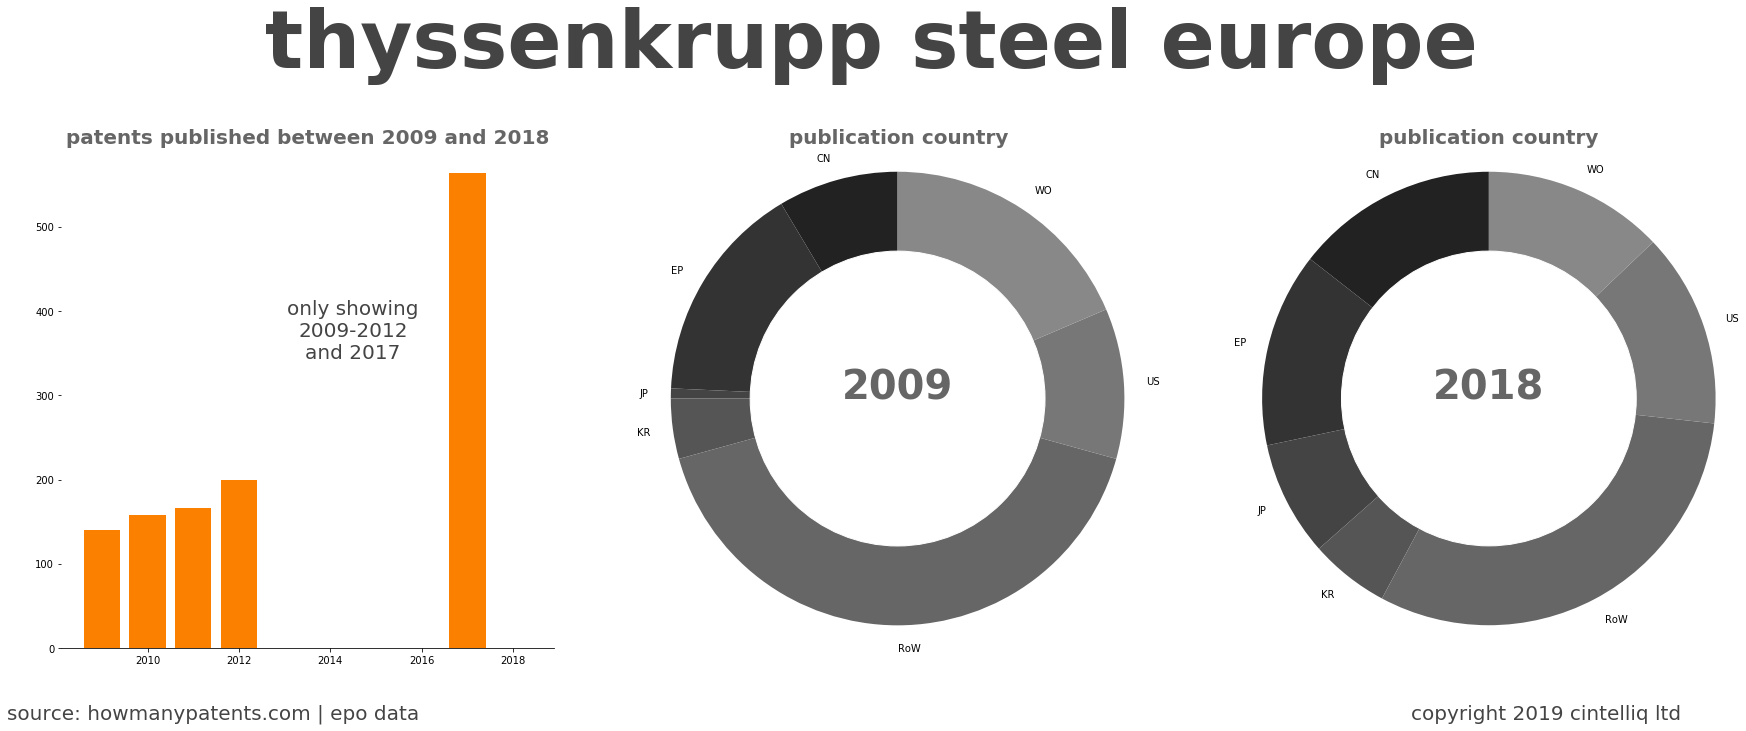 summary of patents for Thyssenkrupp Steel Europe